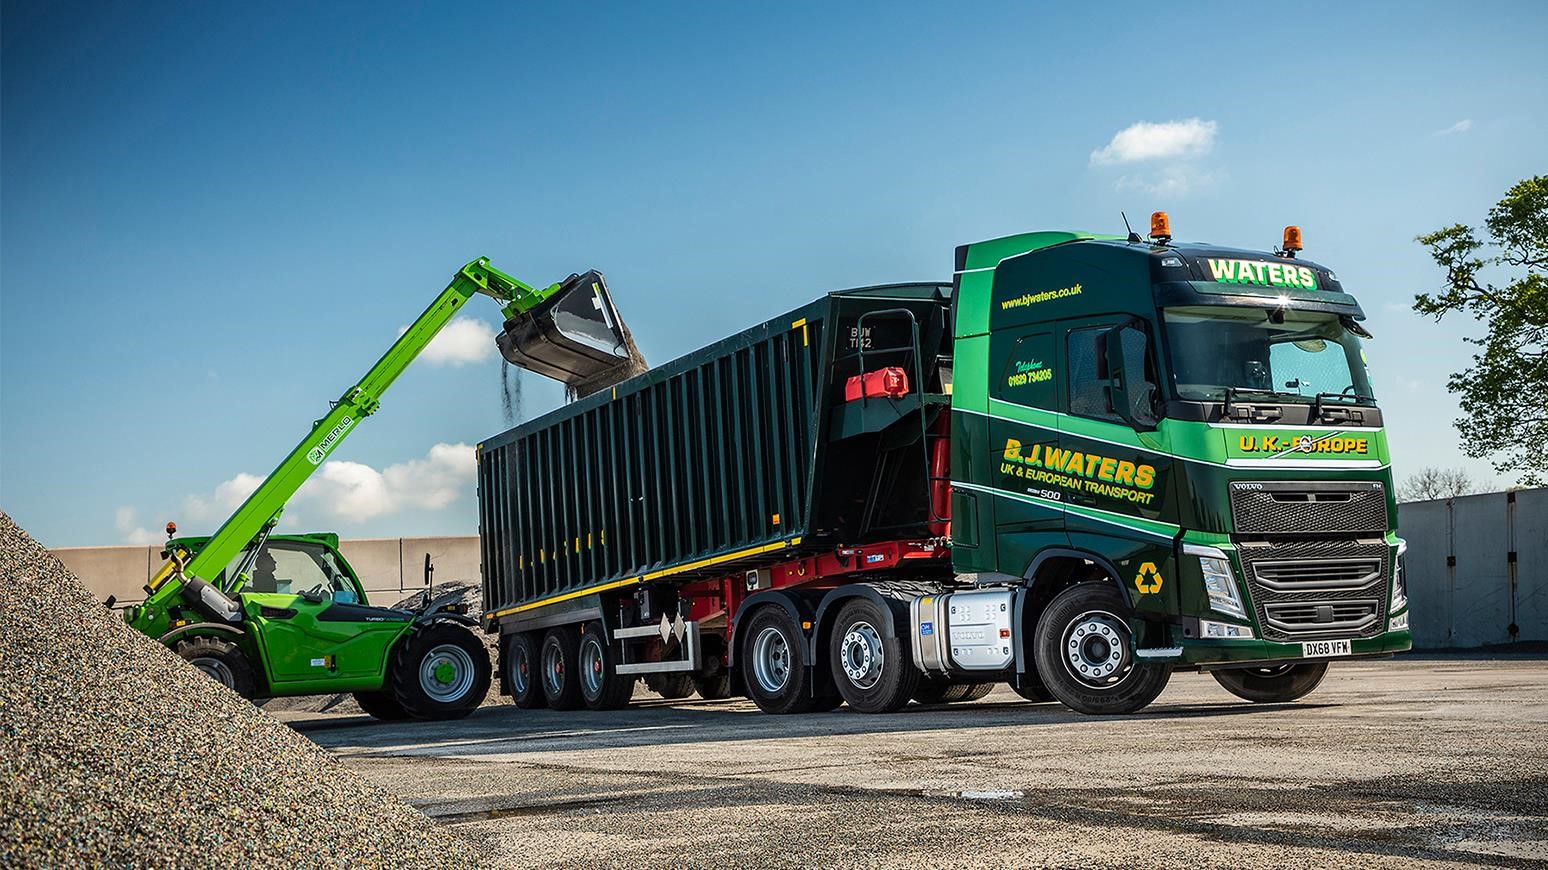 Matlock-Based Transport Company Adds First-Ever Volvo Trucks To Its Fleet